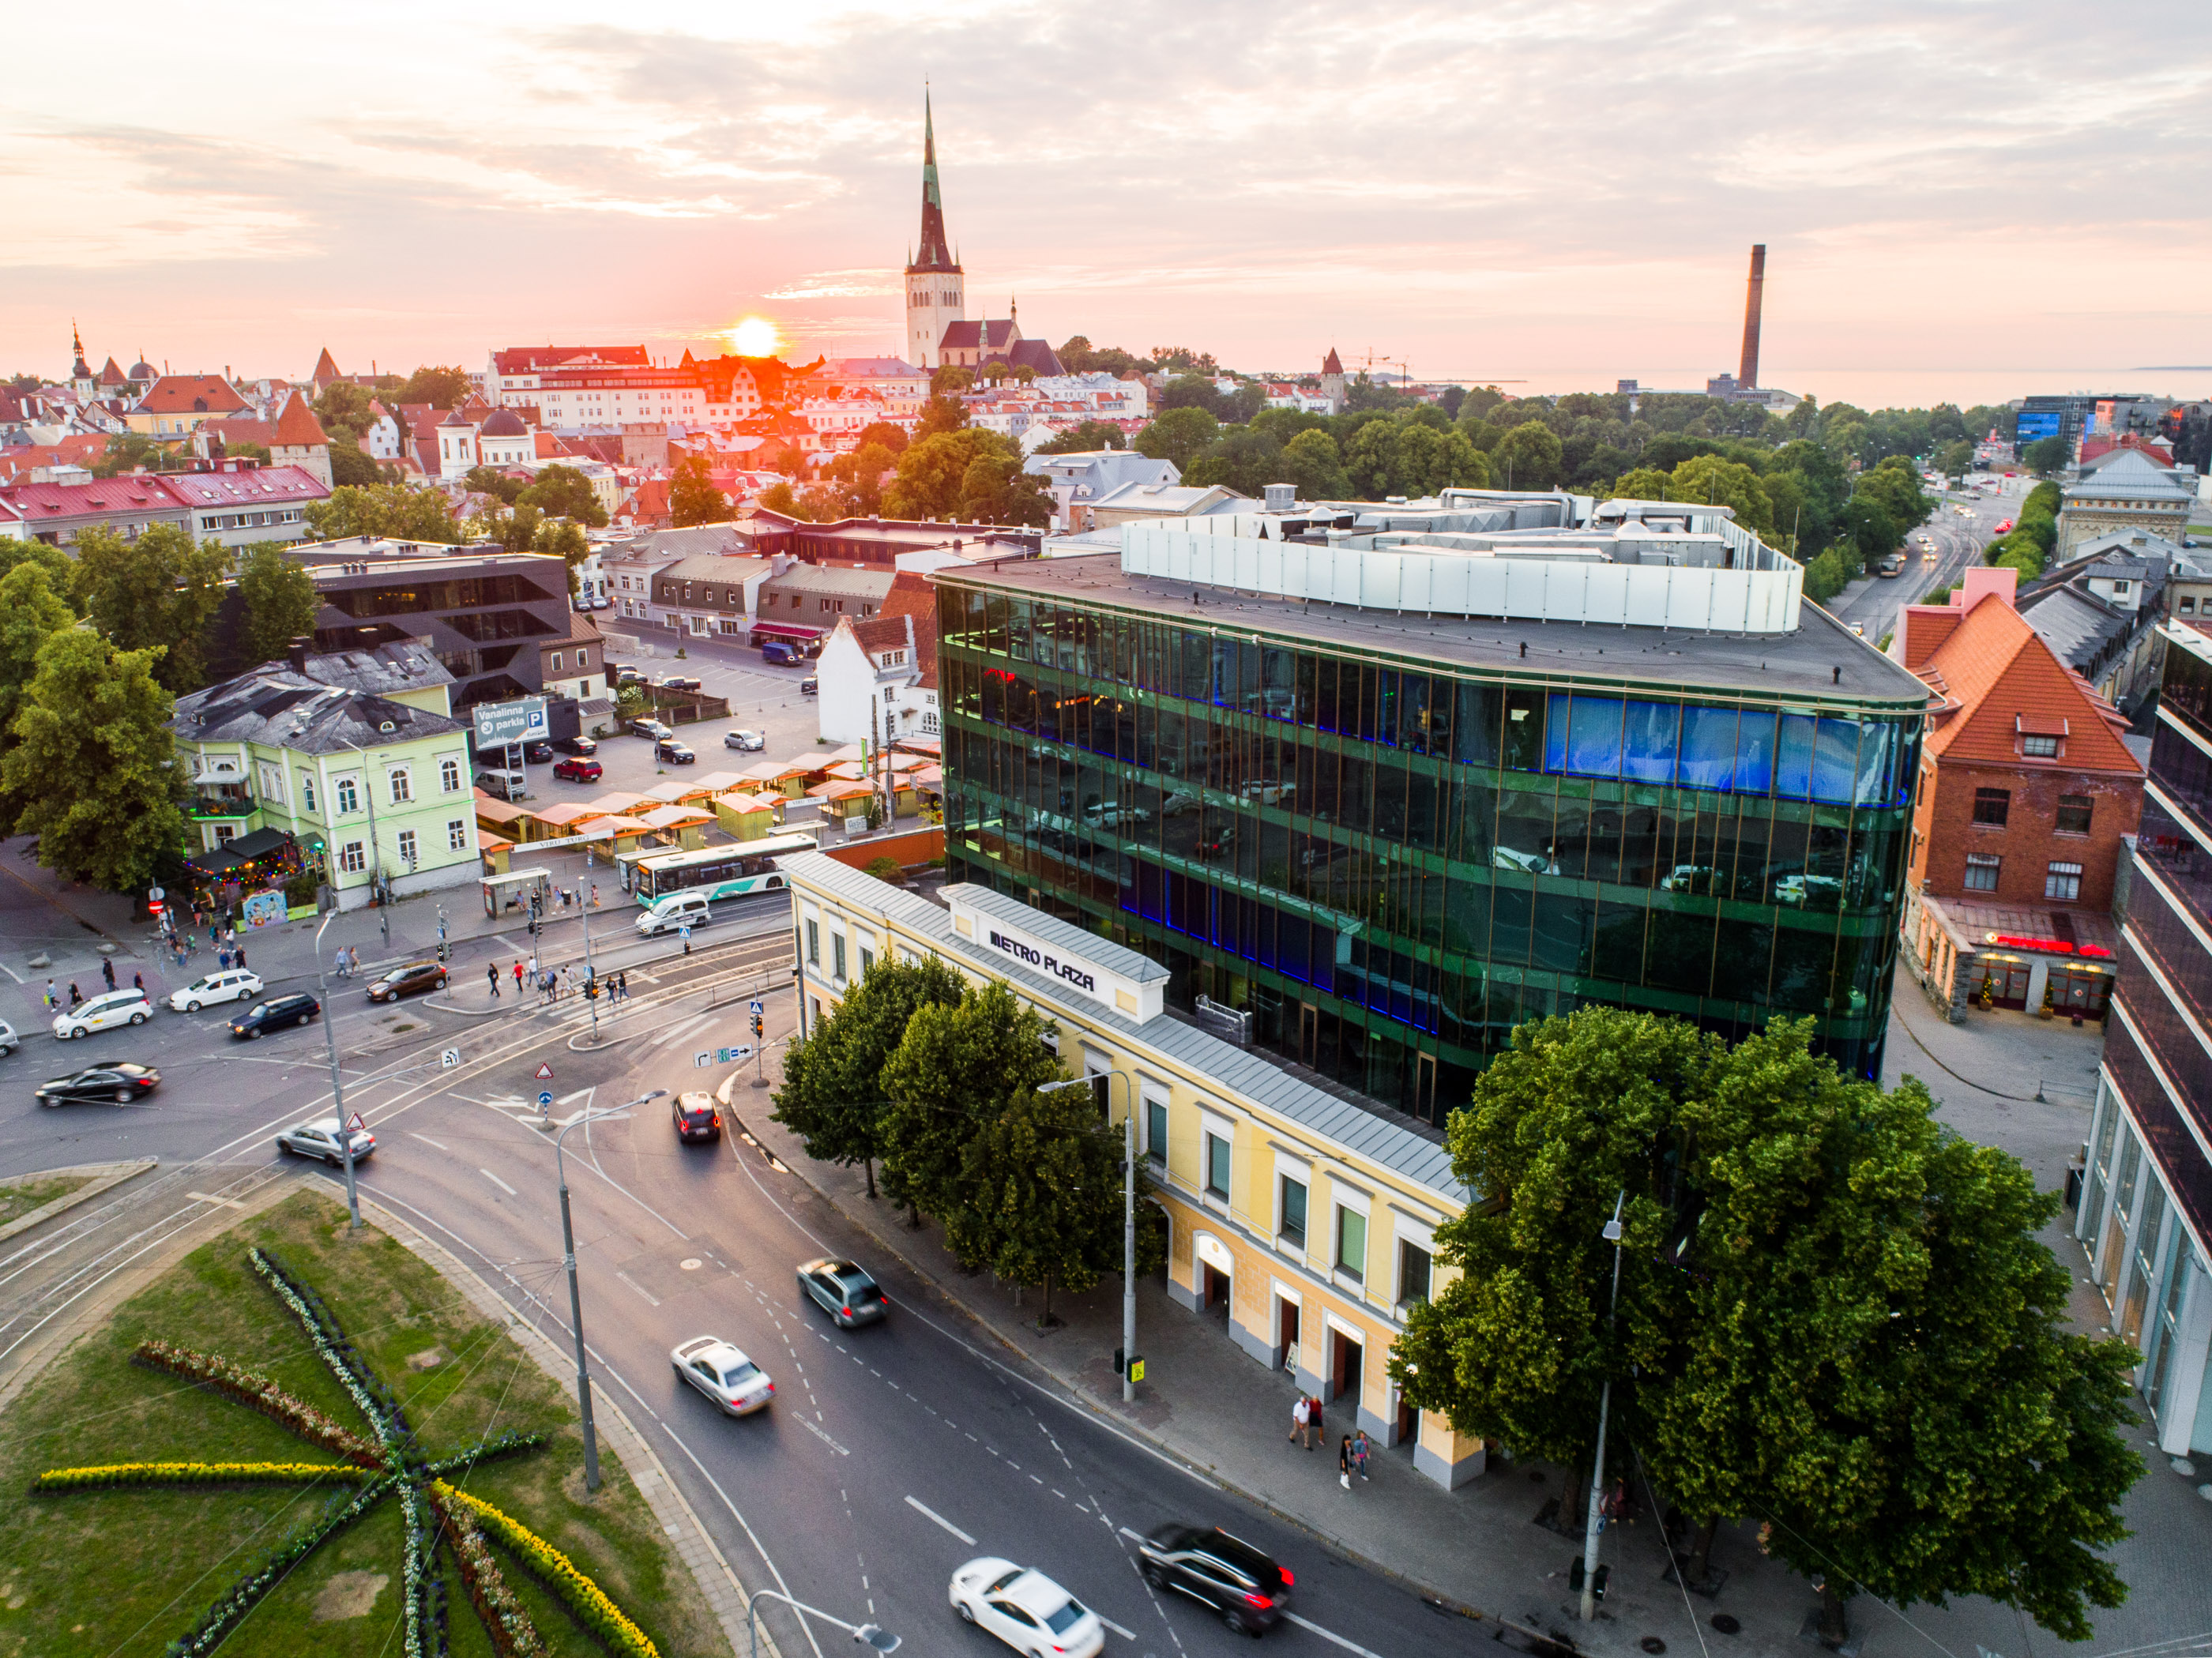 Rising growth and prosperity in the Baltics are driving a growing supply of high quality properties in office, retail and logistics. Metro Plaza, an A-class office building we own in Tallinn, Estonia.